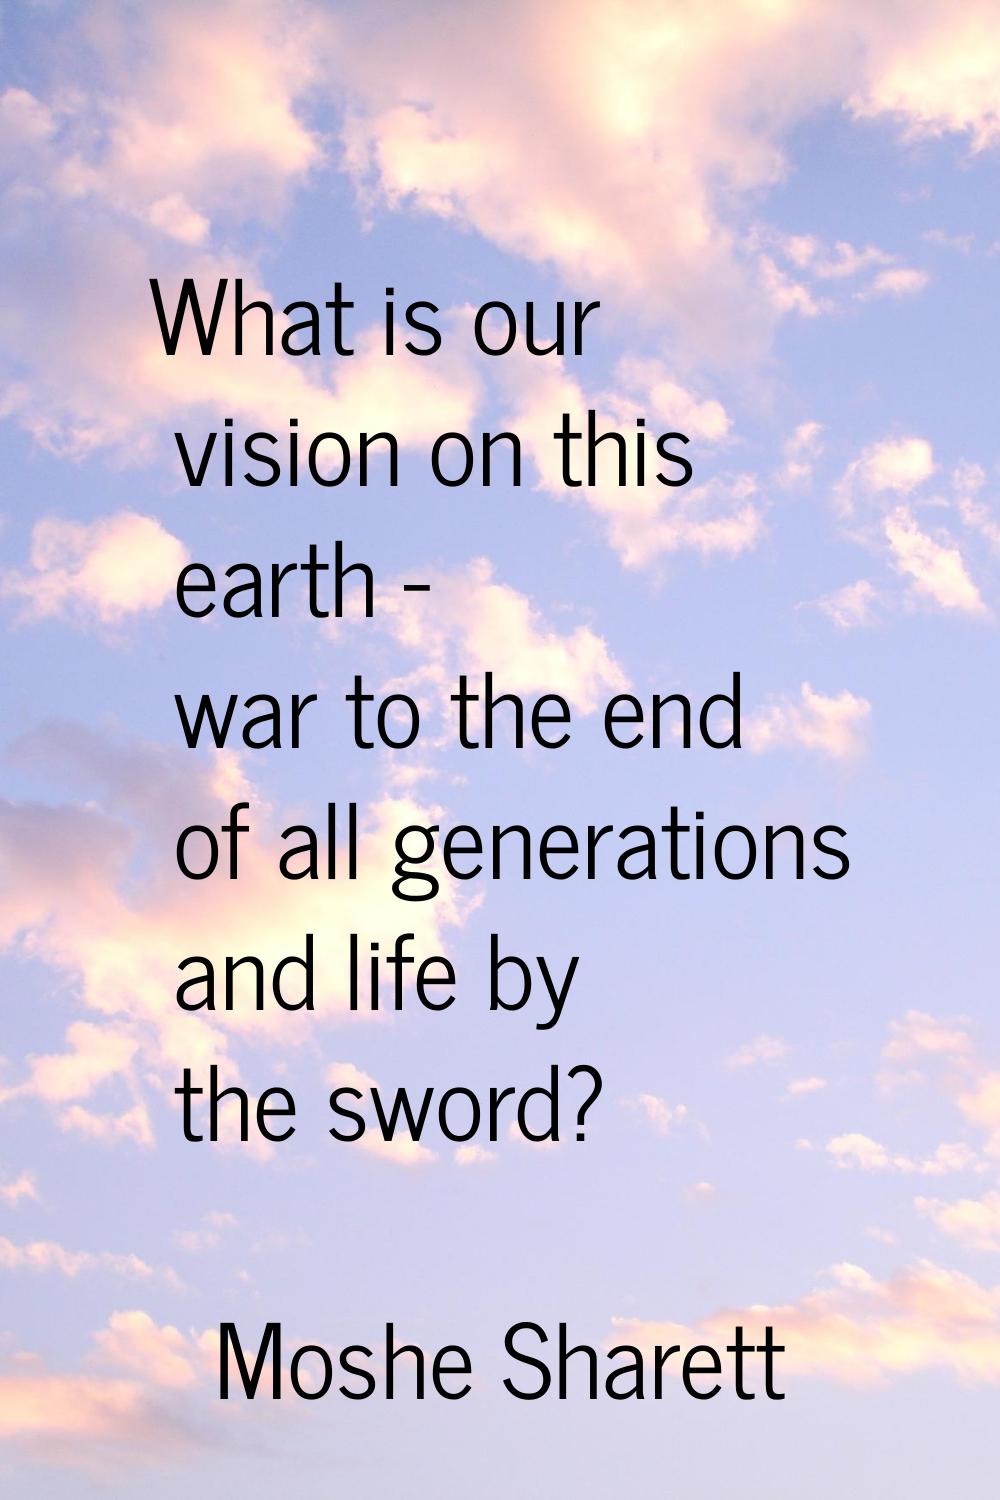 What is our vision on this earth - war to the end of all generations and life by the sword?